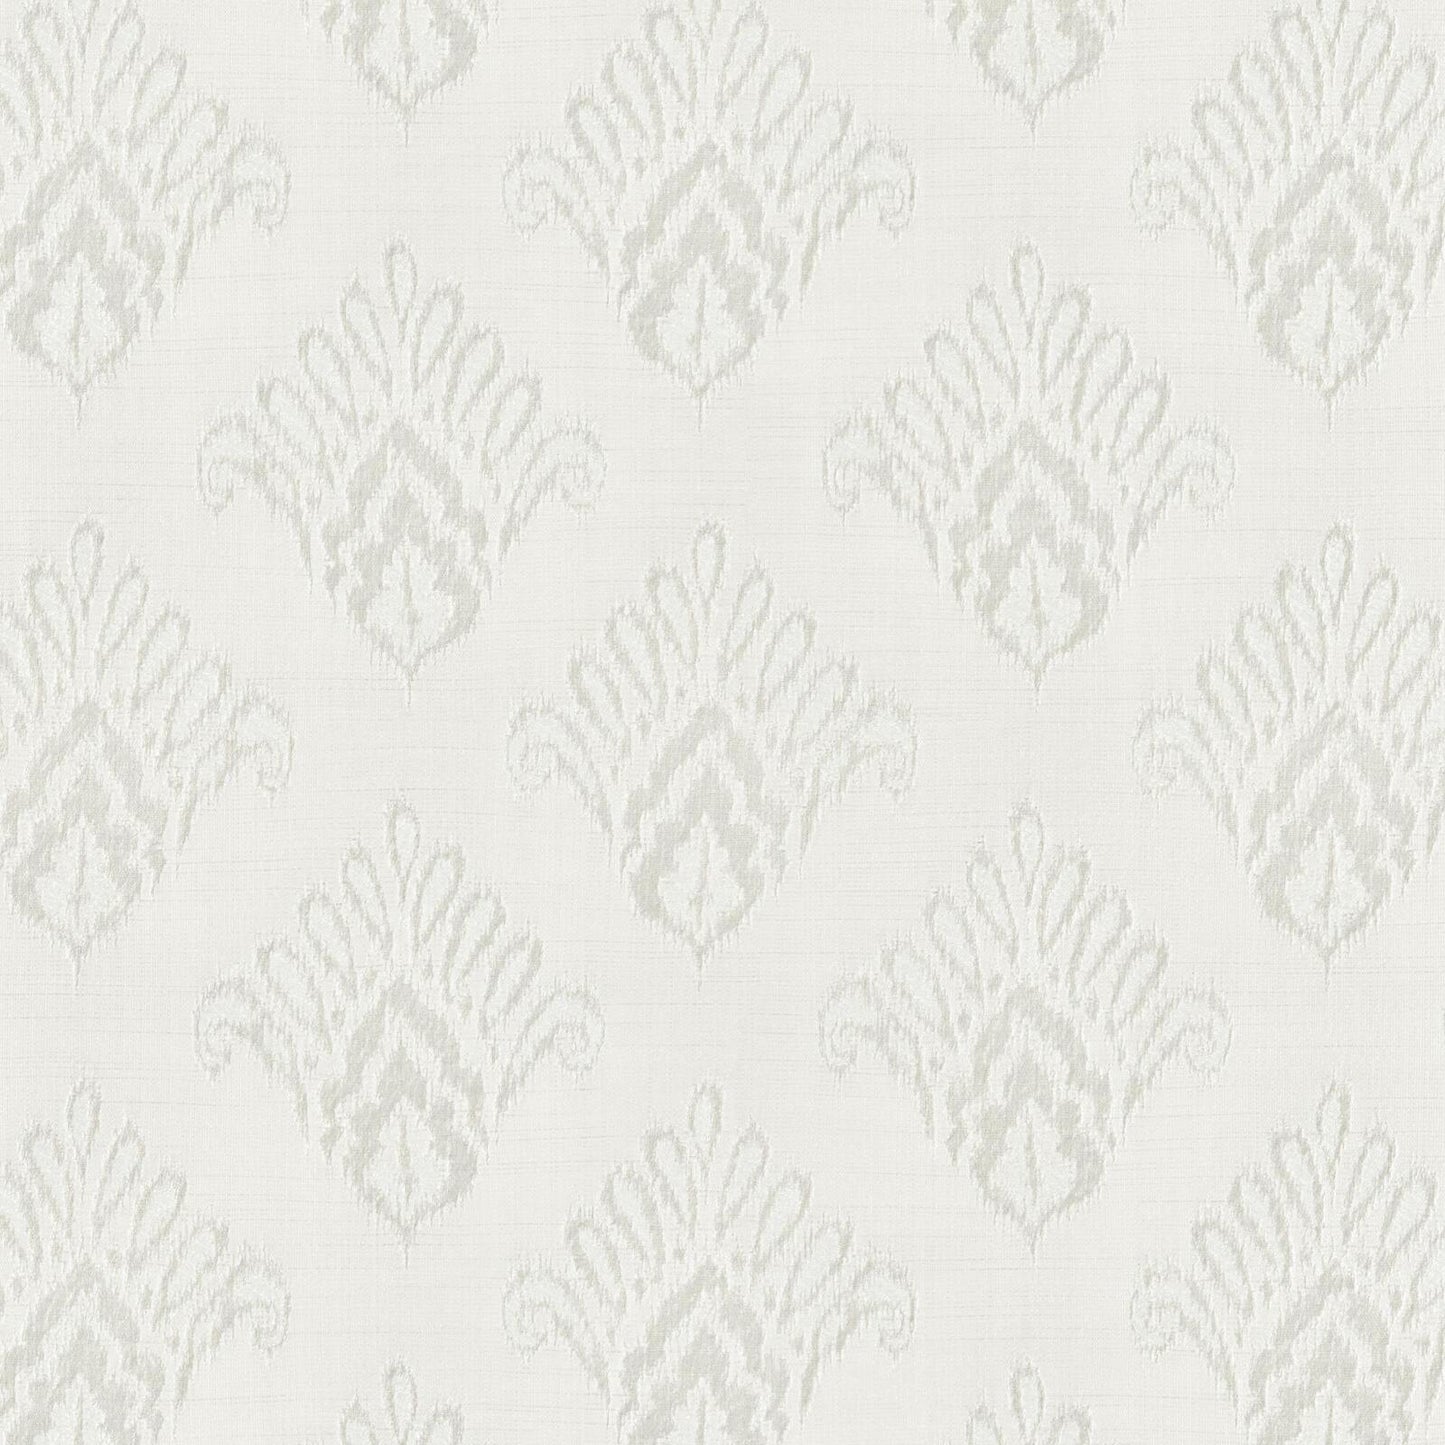 Purchase Maxwell Fabric - Wordsworth, # 910 Feather